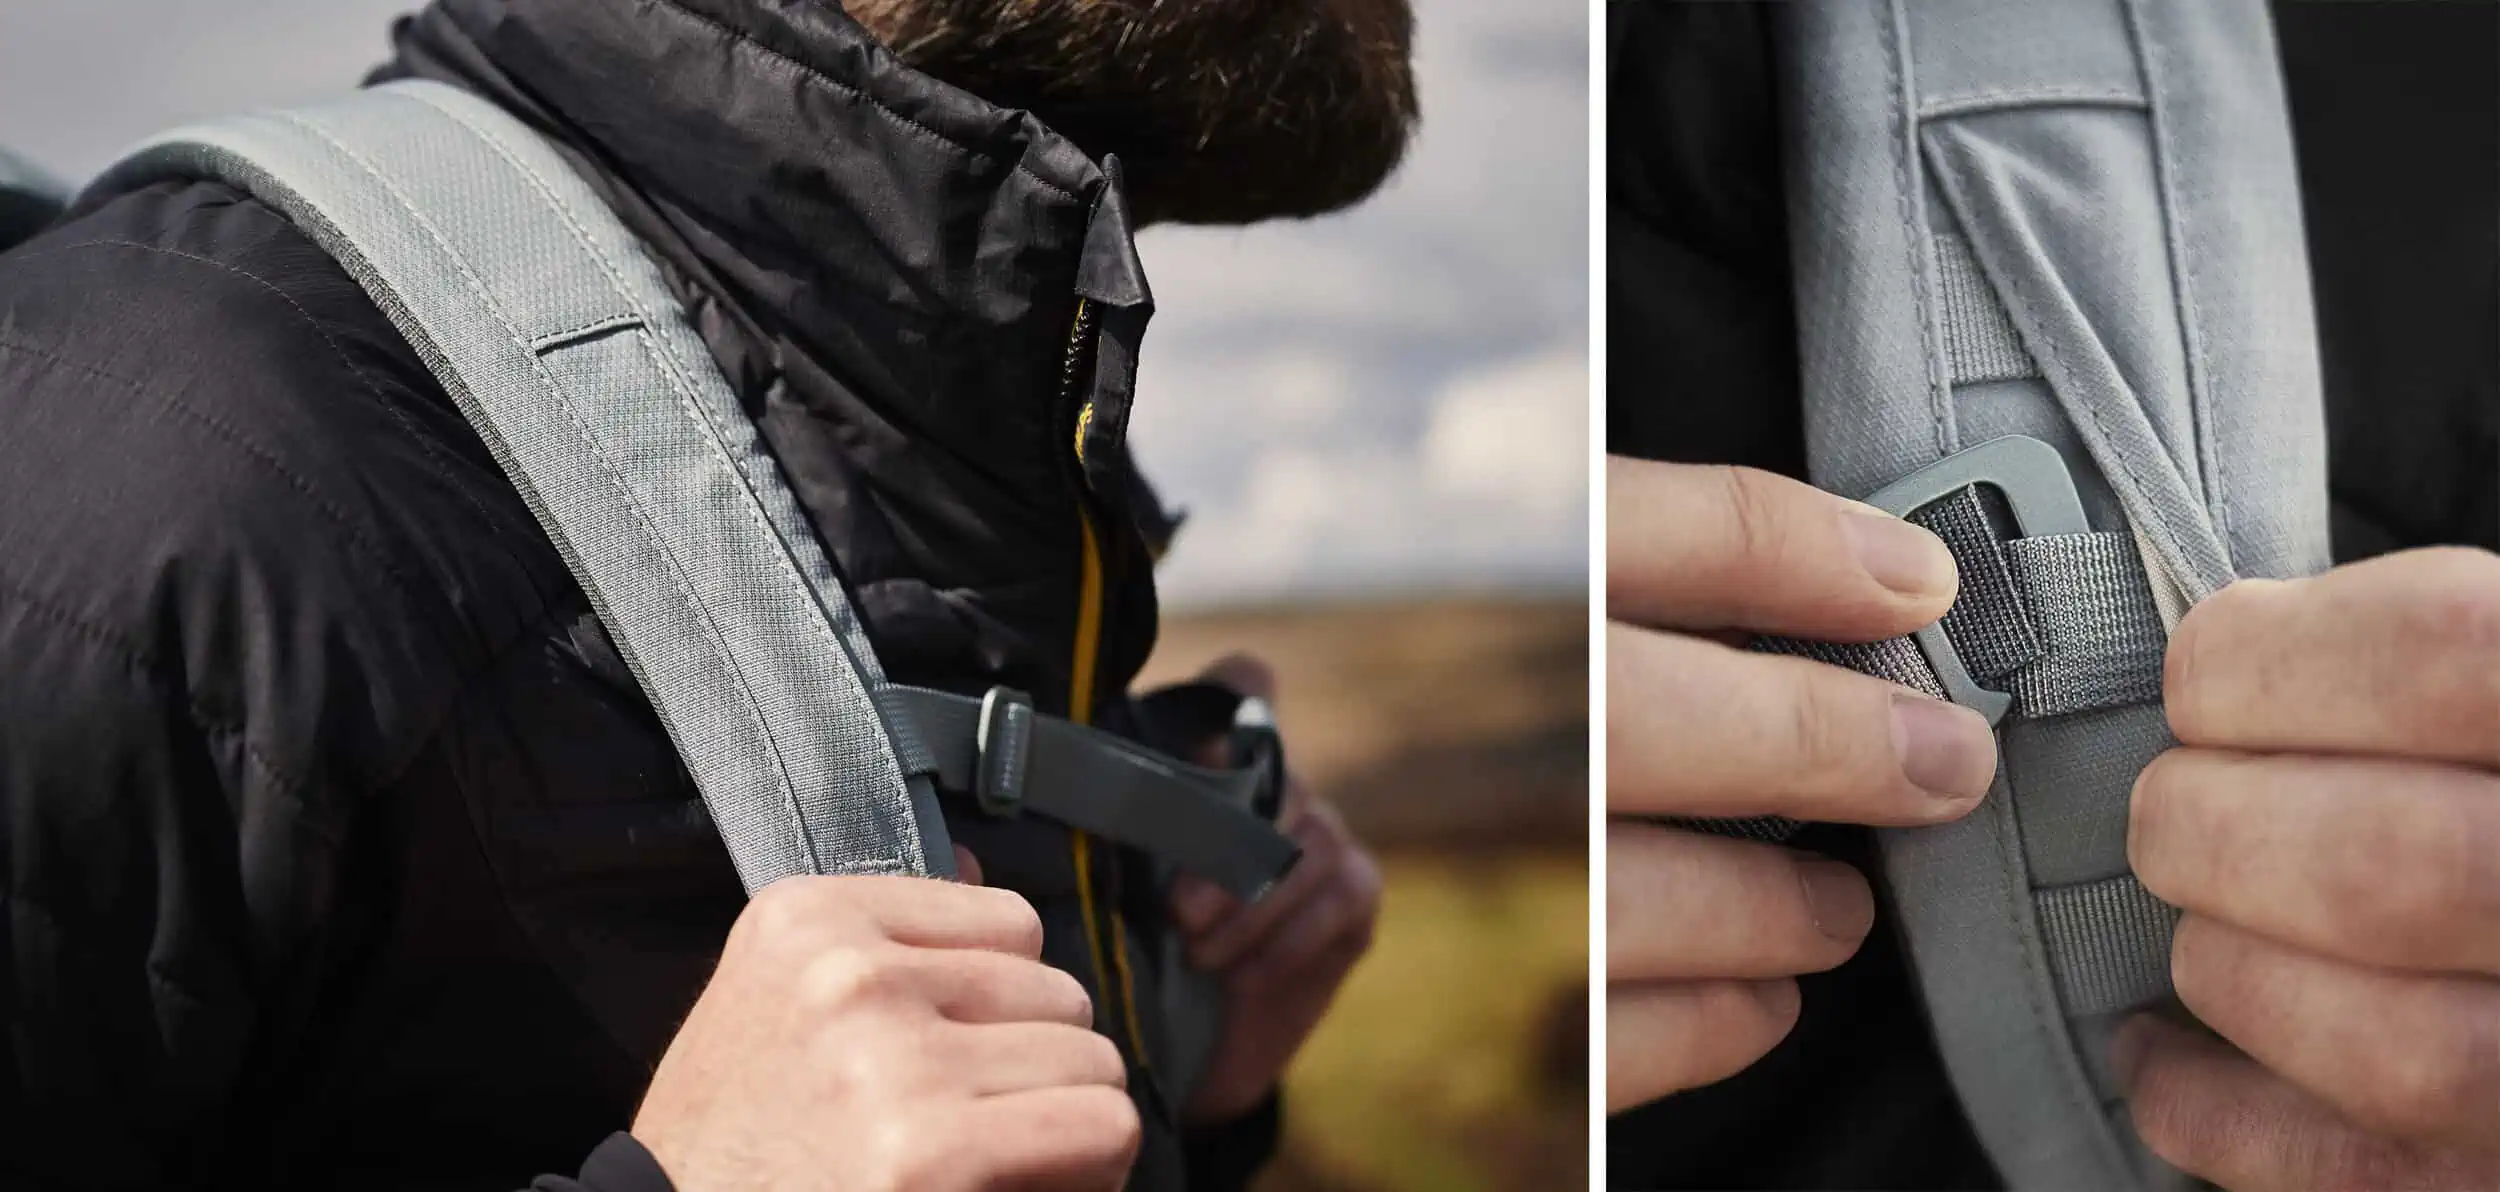 Image description: From left to right – 01: A detail od Matt holding the straps of a Millican ‘The Mavericks’ Smith the Roll 15l pack in Tarn. He looks out to the right and is wearing a black coat. 02: A portrait image. A close-up detail of a strap mechanism on a Millican ‘The Mavericks’ Smith the Roll 15l pack in Tarn. Matt uses his finger to hook the fastener into the strap of the bag.&nbsp;